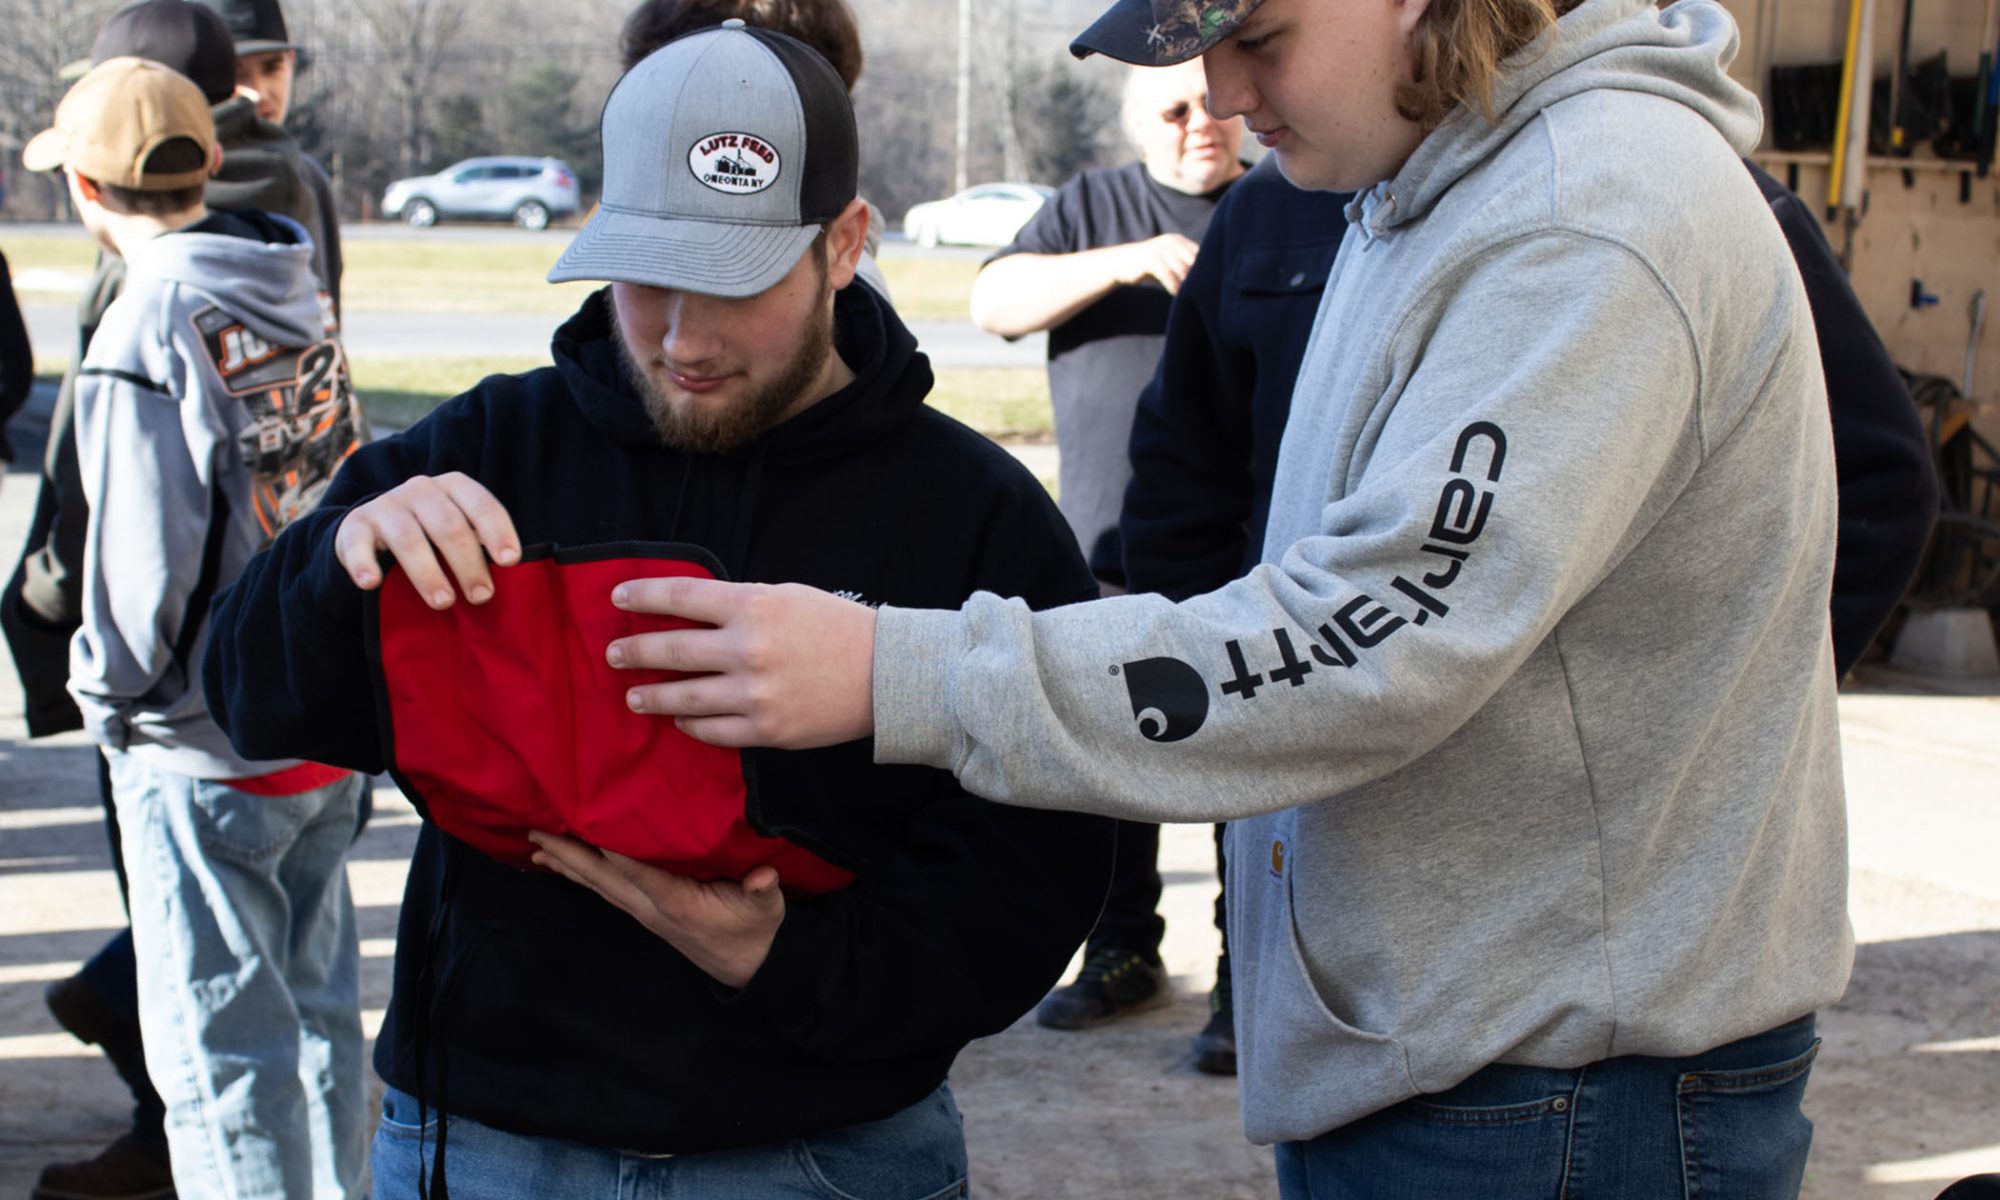 Two students in baseball caps, one in a blue hoodie and another in a grey one, look at the contents inside of a red canvas bag during an outside exercise in the Heavy Equipment program.